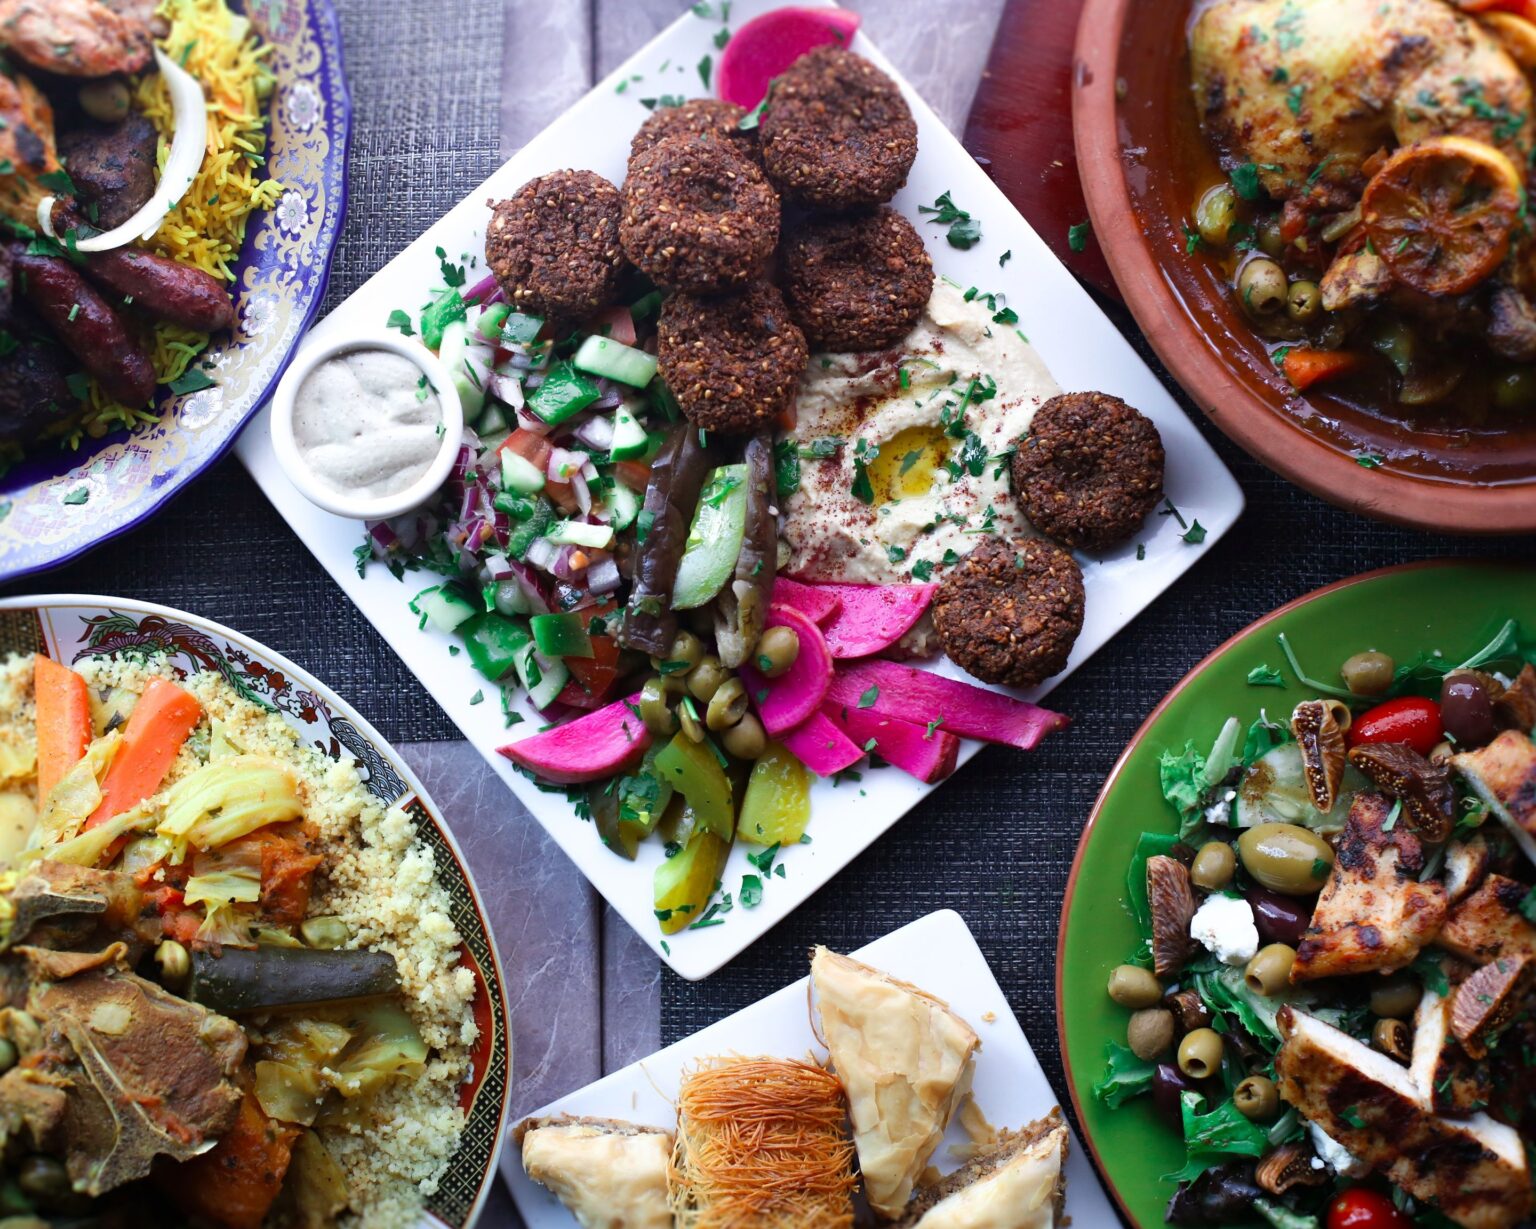 Savoring Authentic Flavors: Exploring the Delights of an Afghan Restaurant